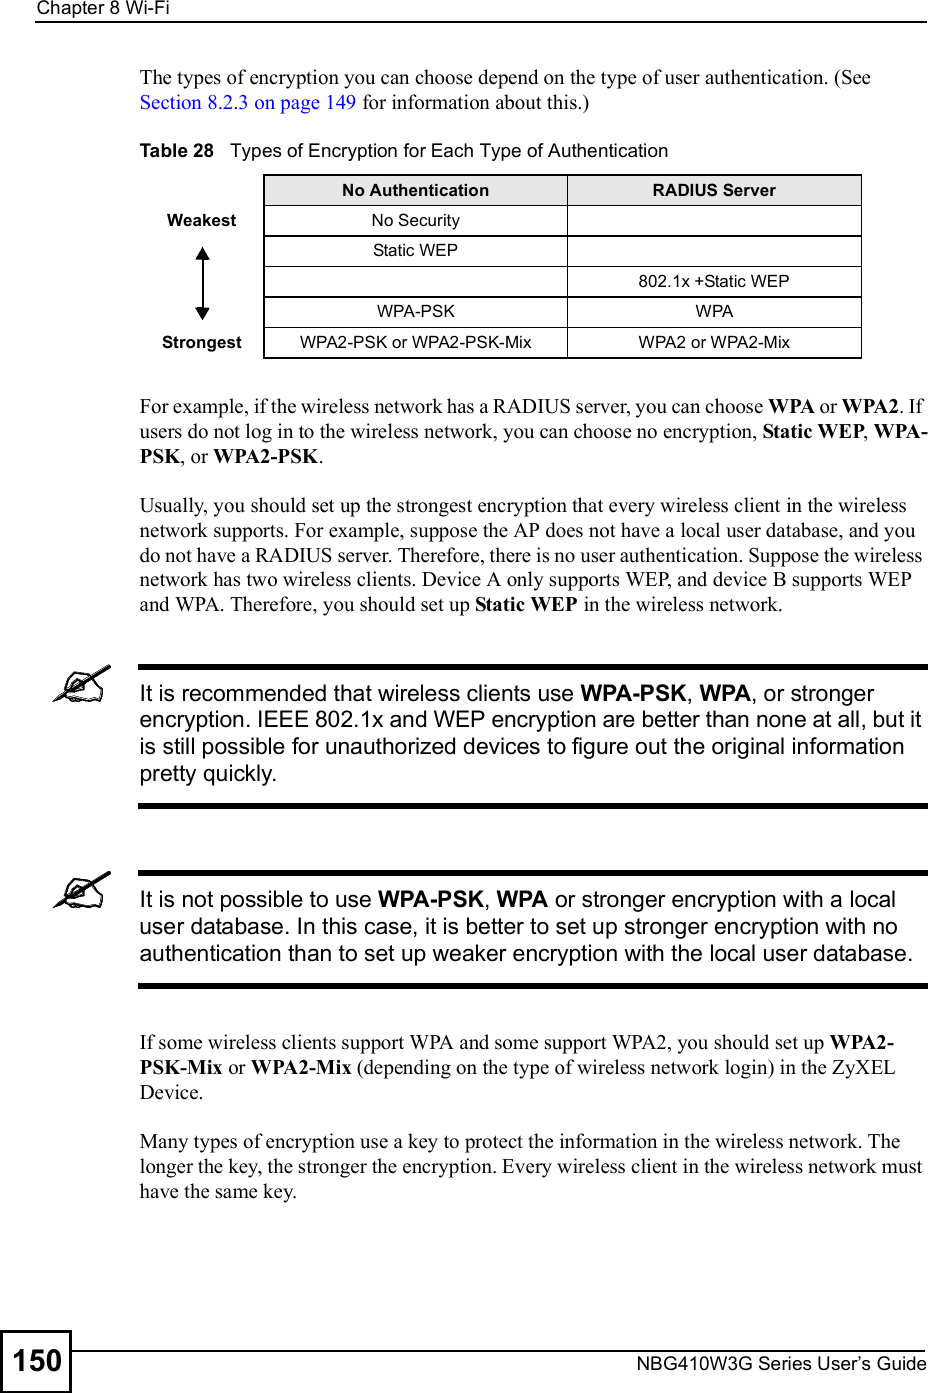 Chapter 8Wi-FiNBG410W3G Series User s Guide150The types of encryption you can choose depend on the type of user authentication. (See Section 8.2.3 on page 149 for information about this.)For example, if the wireless network has a RADIUS server, you can choose WPA or WPA2. If users do not log in to the wireless network, you can choose no encryption, Static WEP, WPA-PSK, or WPA2-PSK.Usually, you should set up the strongest encryption that every wireless client in the wireless network supports. For example, suppose the AP does not have a local user database, and you do not have a RADIUS server. Therefore, there is no user authentication. Suppose the wireless network has two wireless clients. Device A only supports WEP, and device B supports WEP and WPA. Therefore, you should set up Static WEP in the wireless network.It is recommended that wireless clients use WPA-PSK, WPA, or stronger encryption. IEEE 802.1x and WEP encryption are better than none at all, but it is still possible for unauthorized devices to figure out the original information pretty quickly.It is not possible to use WPA-PSK, WPA or stronger encryption with a local user database. In this case, it is better to set up stronger encryption with no authentication than to set up weaker encryption with the local user database.If some wireless clients support WPA and some support WPA2, you should set up WPA2-PSK-Mix or WPA2-Mix (depending on the type of wireless network login) in the ZyXEL Device.Many types of encryption use a key to protect the information in the wireless network. The longer the key, the stronger the encryption. Every wireless client in the wireless network must have the same key.Table 28   Types of Encryption for Each Type of AuthenticationNo Authentication RADIUS ServerWeakest No SecurityStatic WEP802.1x +Static WEPWPA-PSKWPAStrongest WPA2-PSK or WPA2-PSK-MixWPA2 or WPA2-Mix